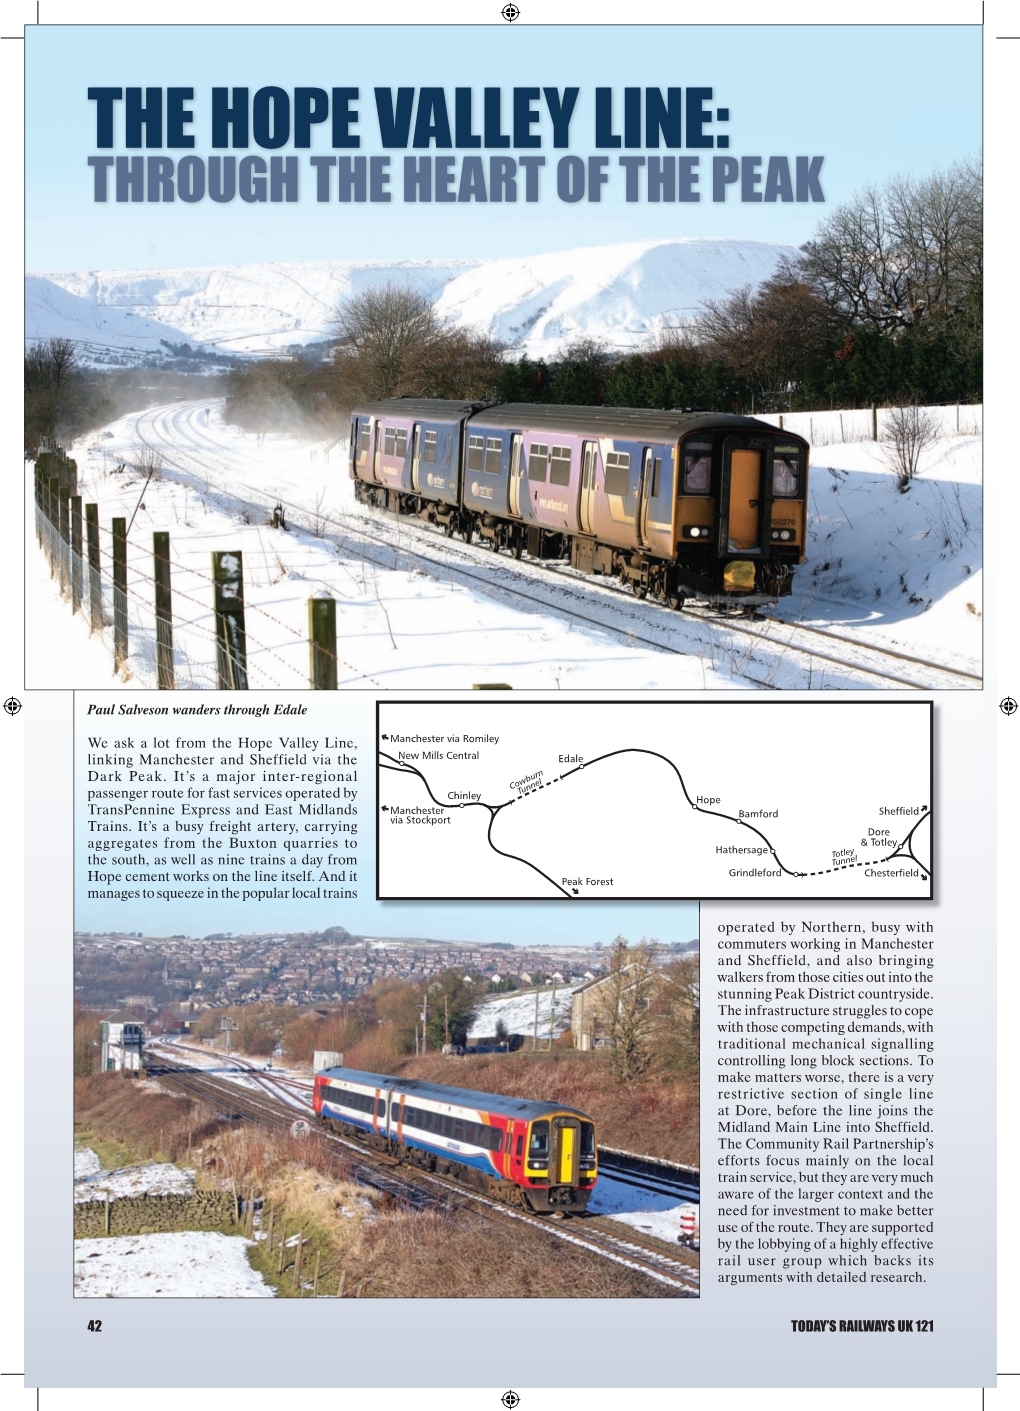 The Hope Valley Line: Through the Heart of the Peak